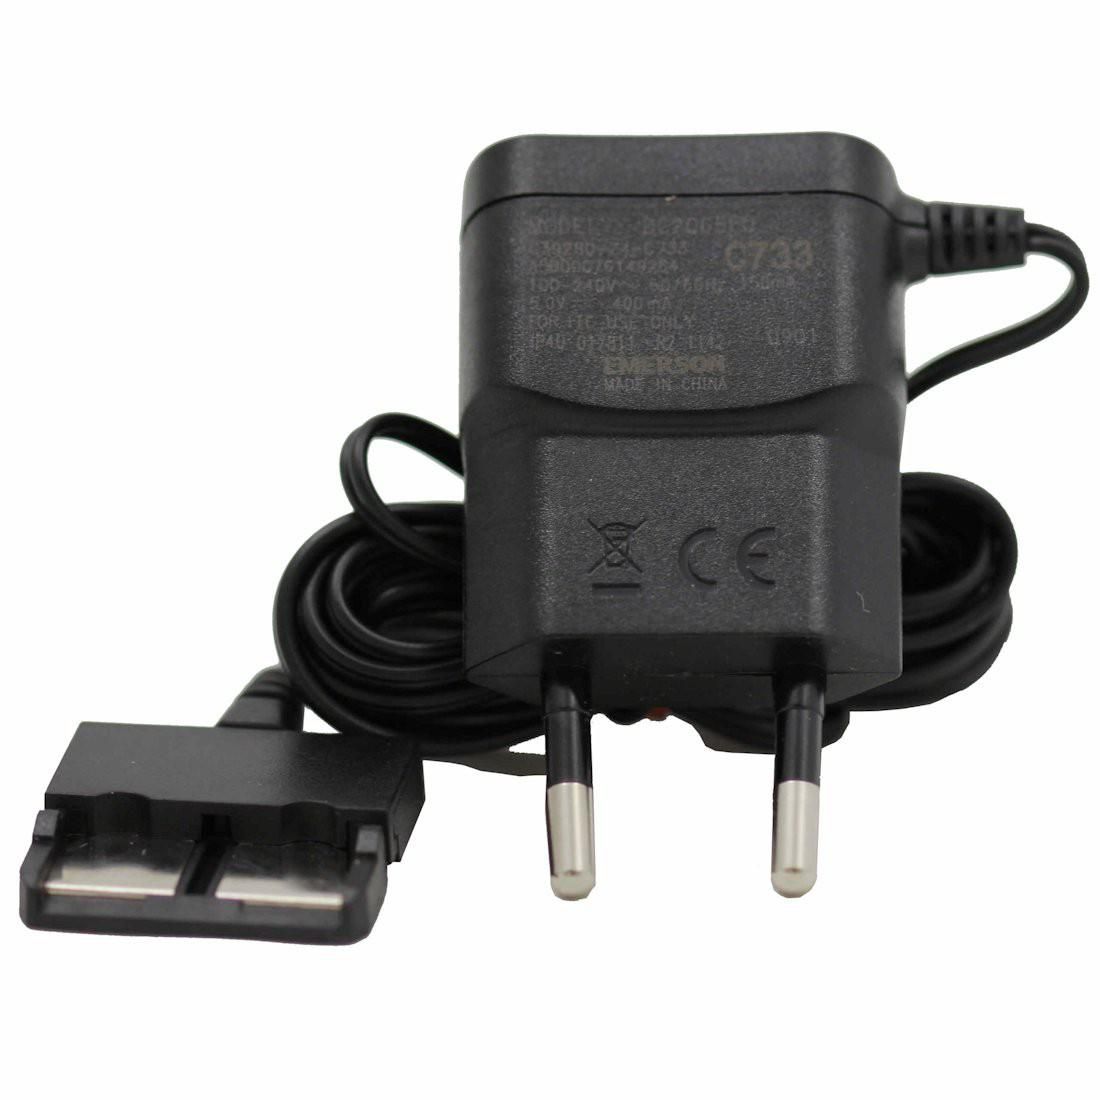 Gigaset C39280-Z4-C733 W128285598 Mobile Device Charger Black 